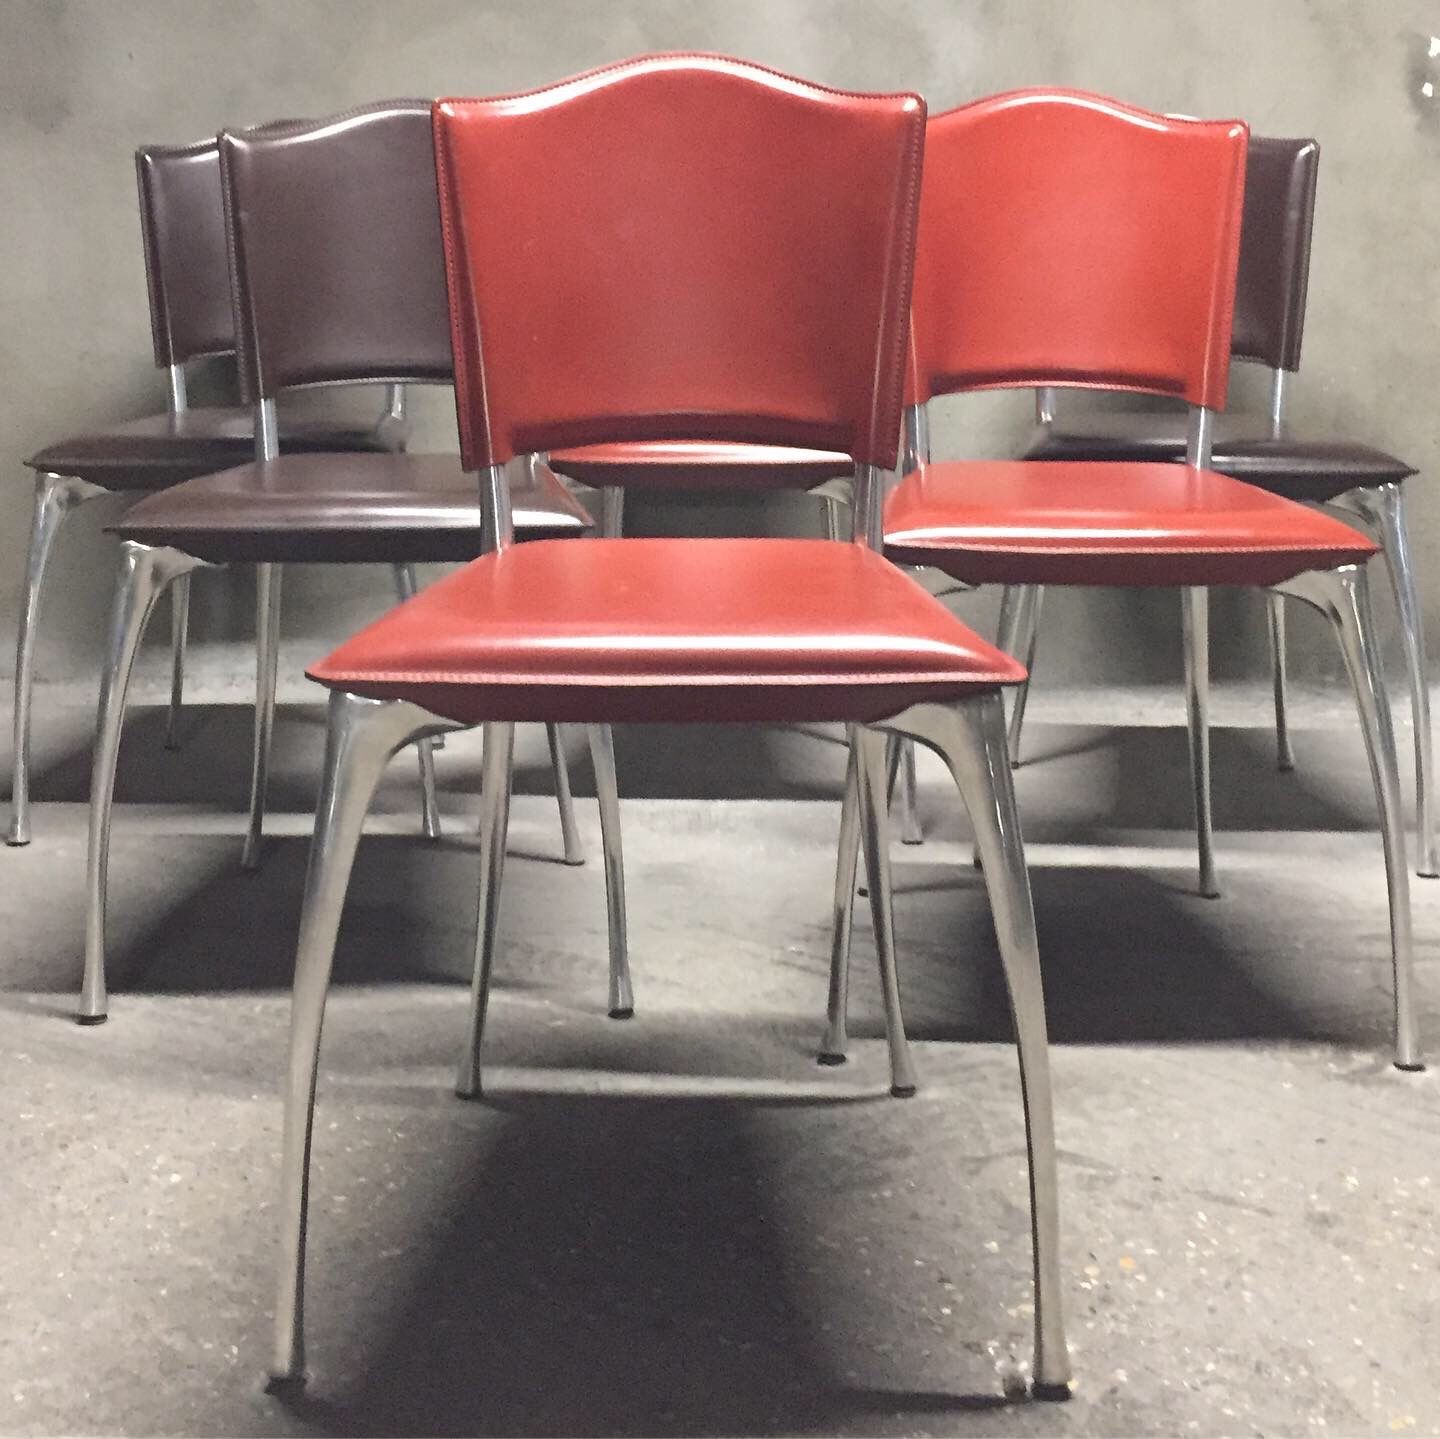 Null DEQUET Bernard, for Protis, Six Léa chairs, circa 1990.

Structure in polis&hellip;